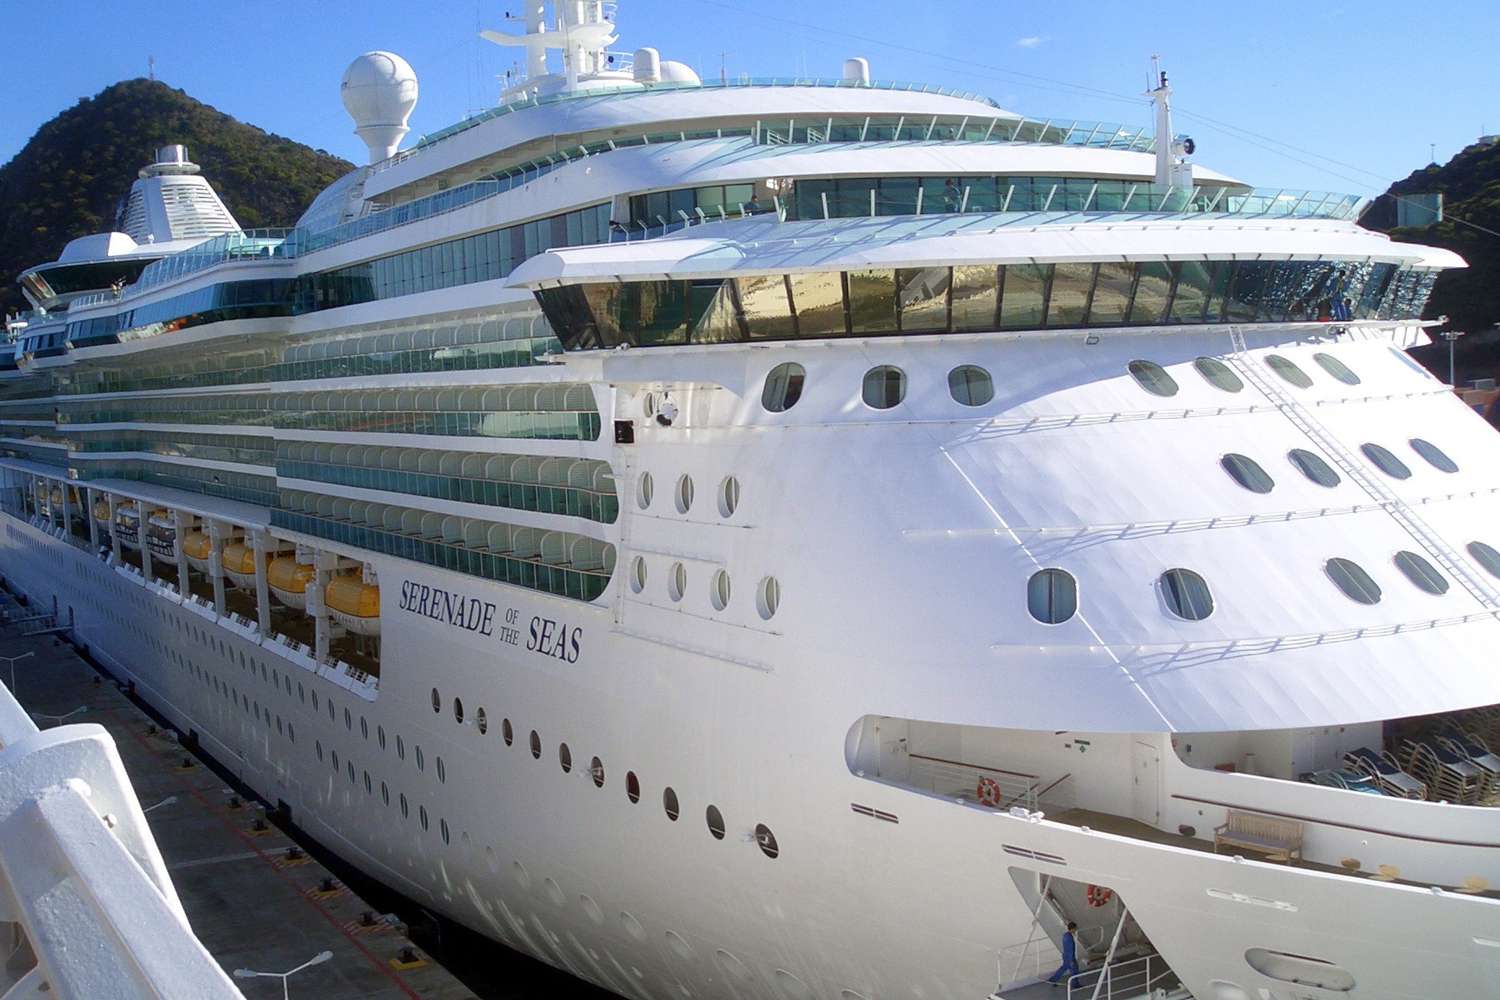 royal caribbean confirms death of passenger on 9-month world cruise